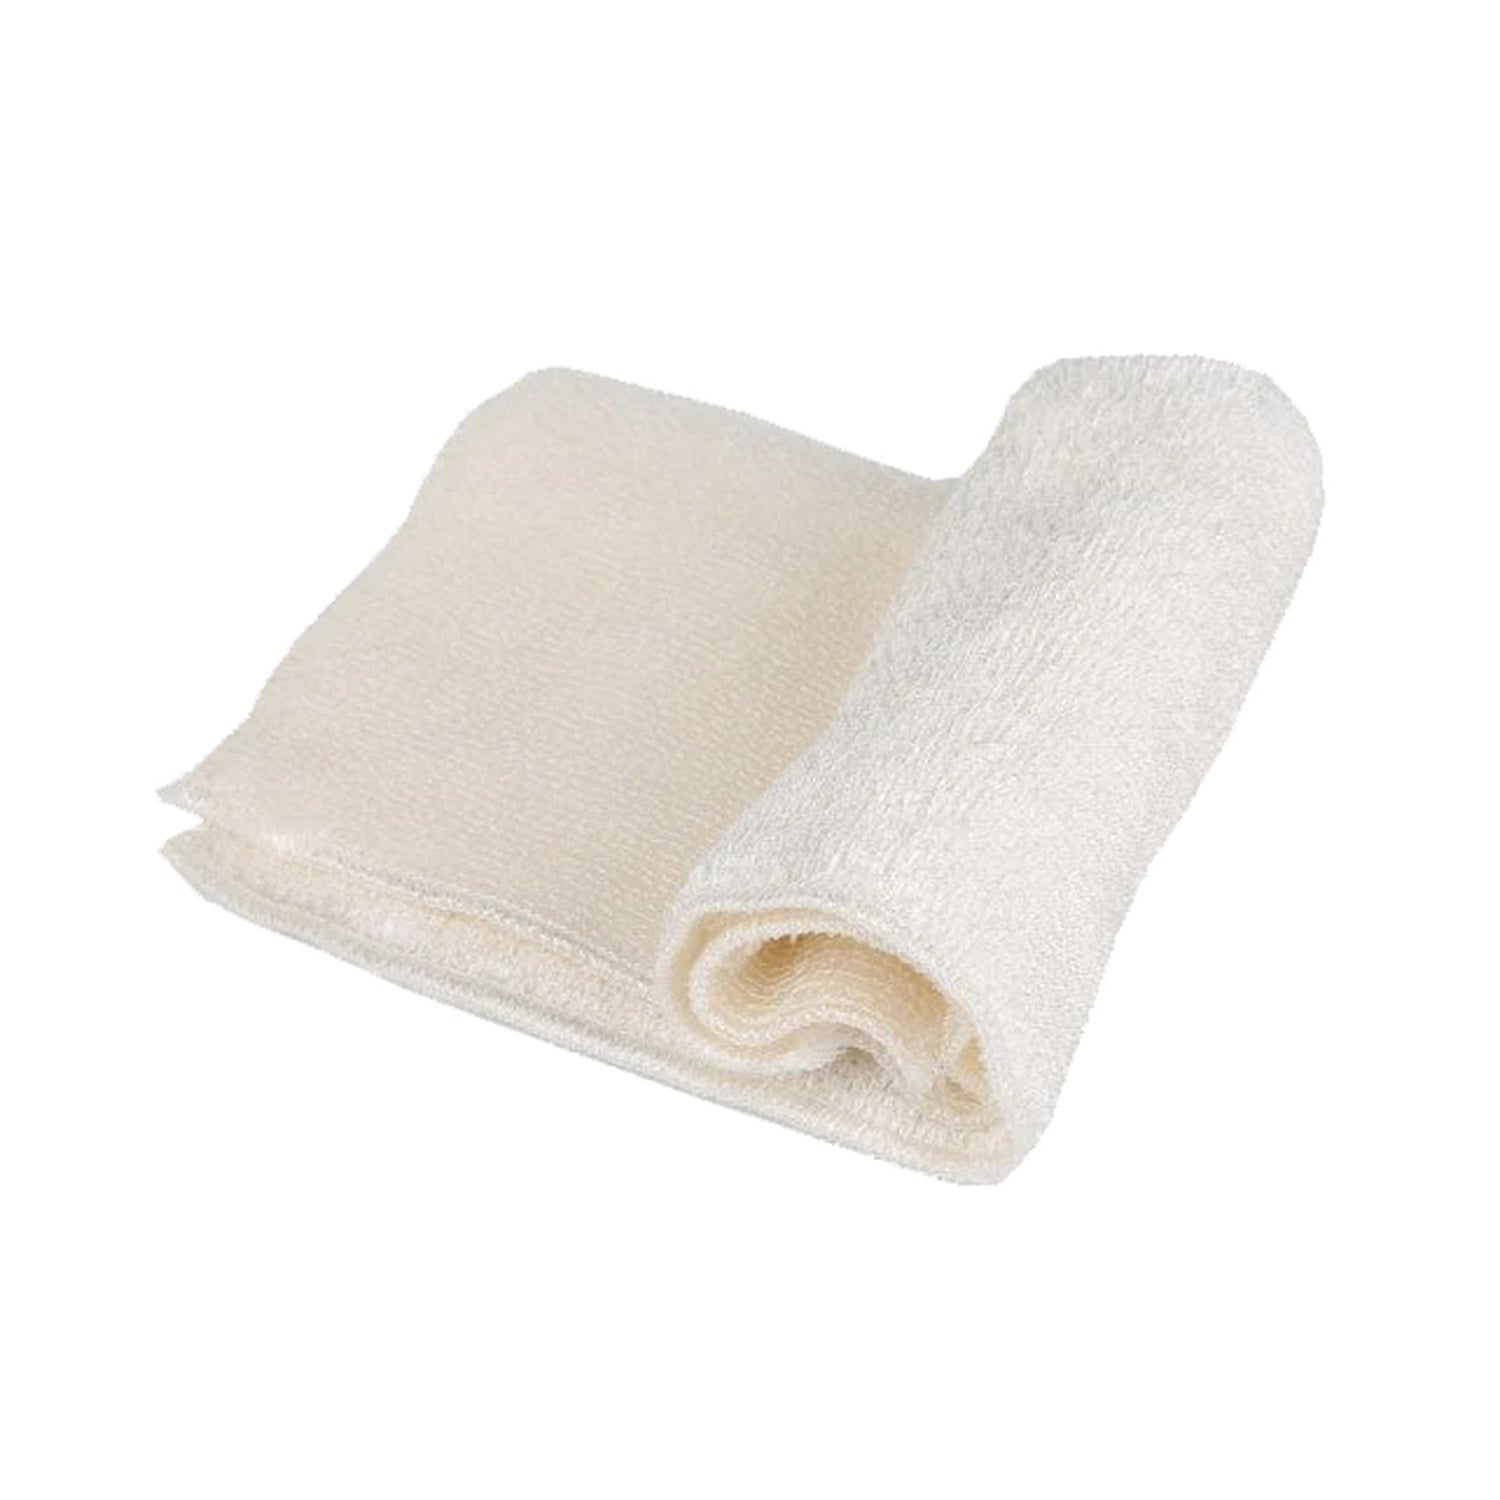 Bamboo Polishing Cloth (2Pce) by Gilly's